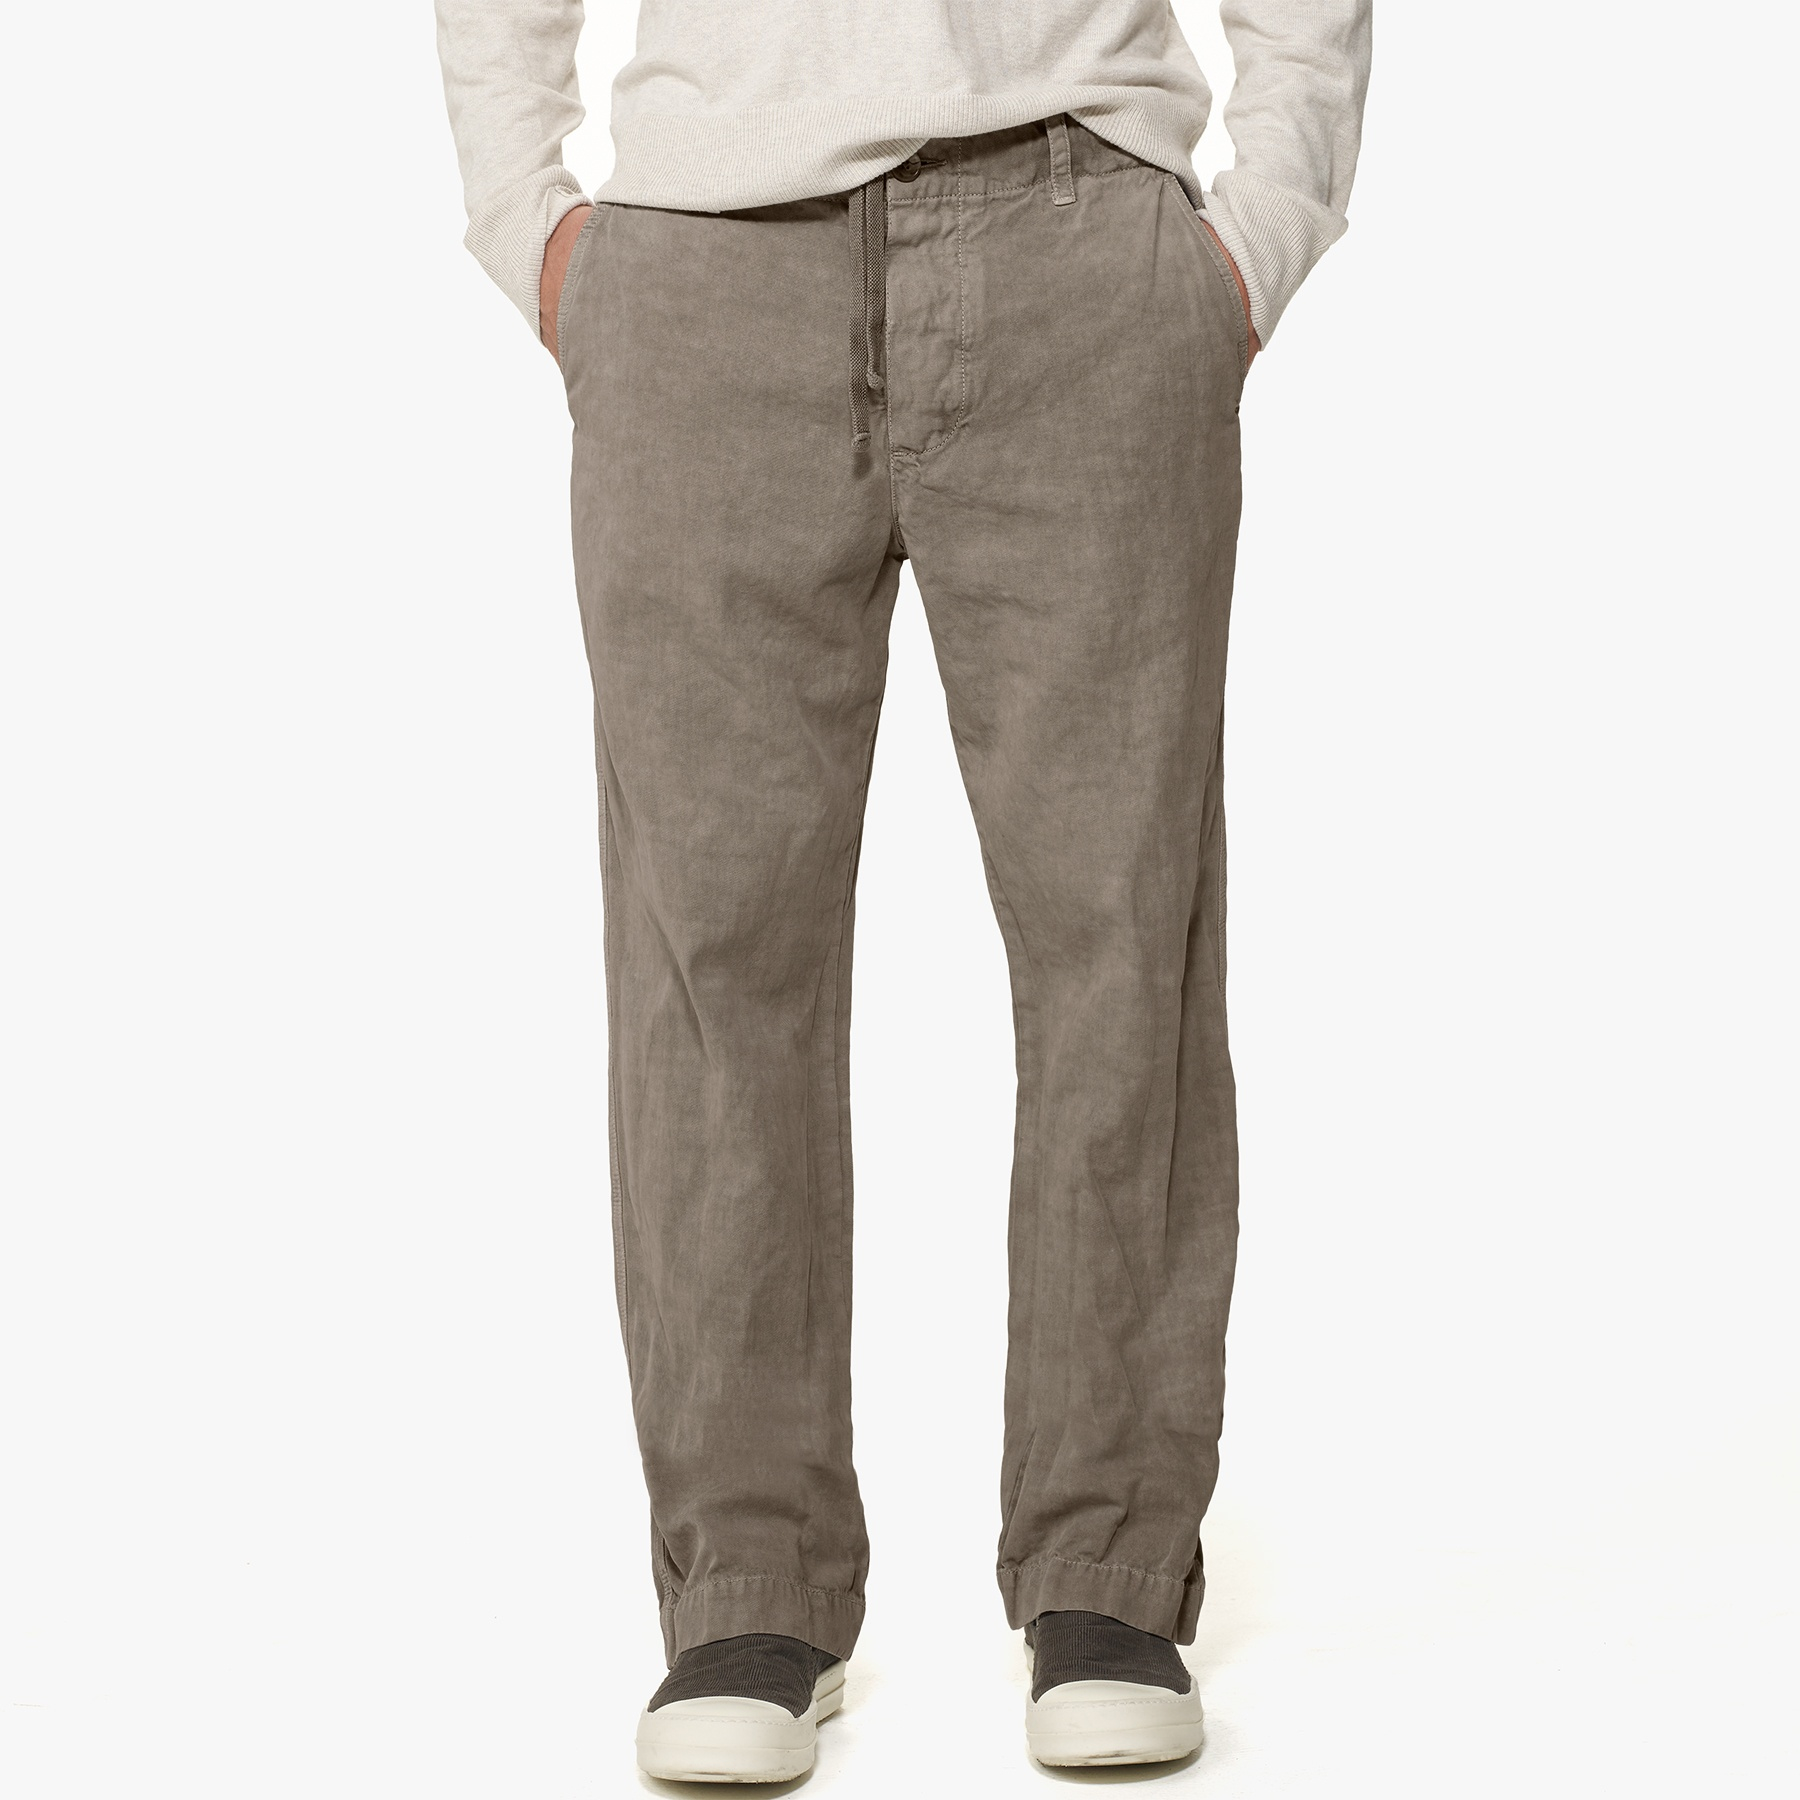 Lyst - James perse Cotton Linen Utility Pant in Gray for Men